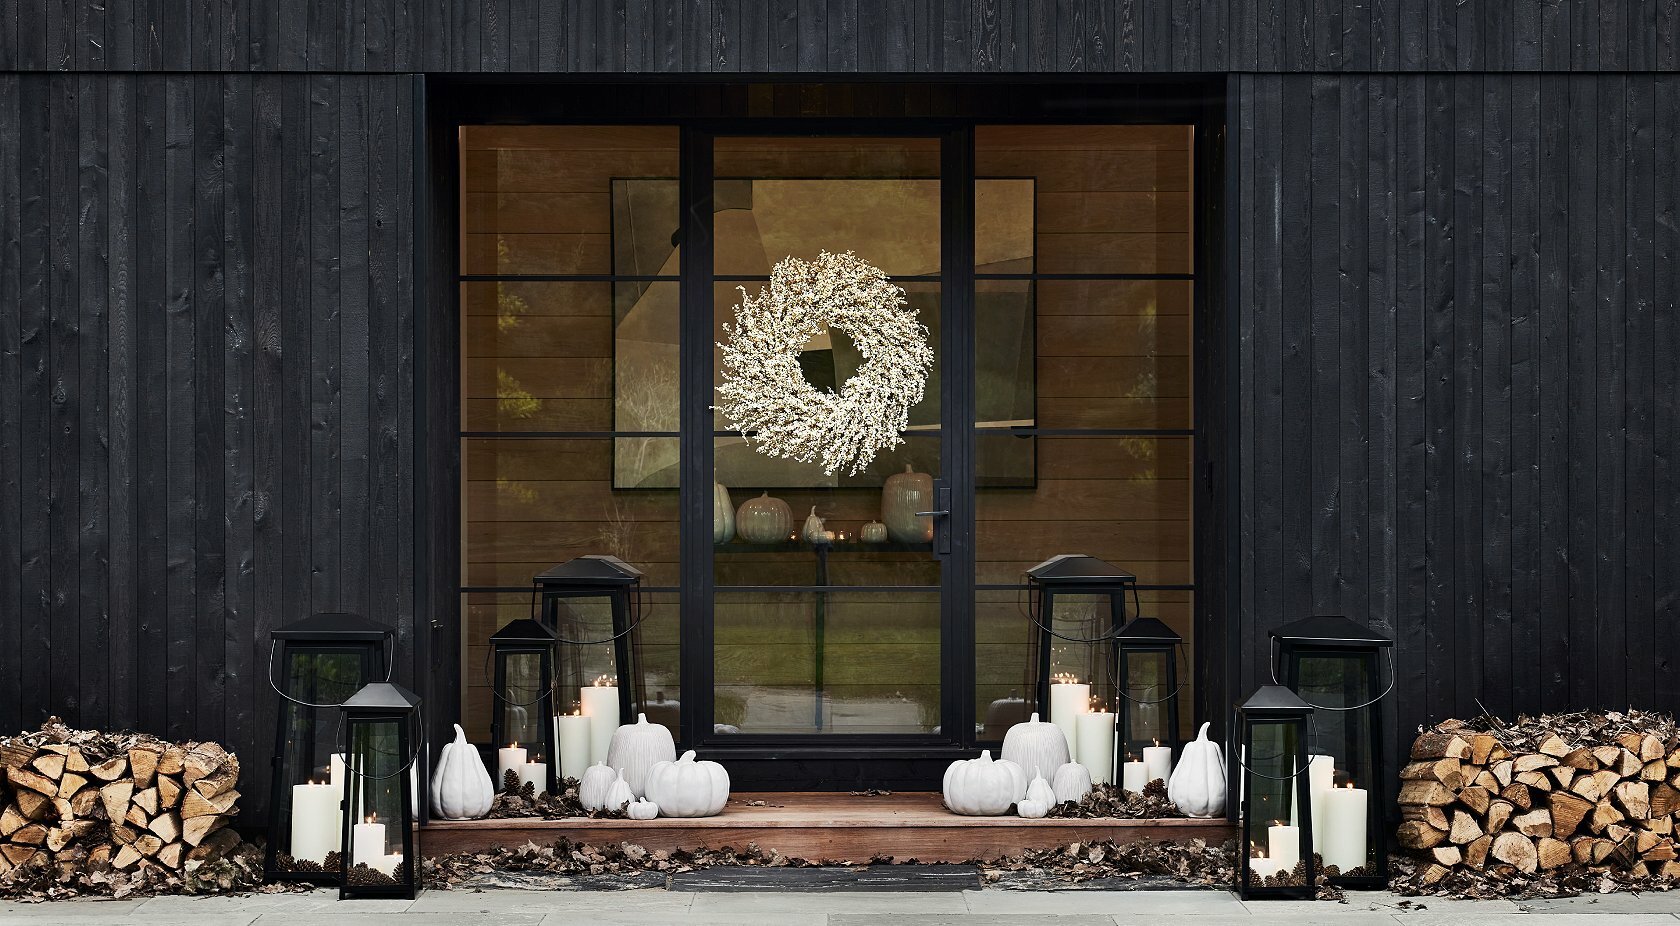 Wreaths, lanterns, and more outdoor home decor